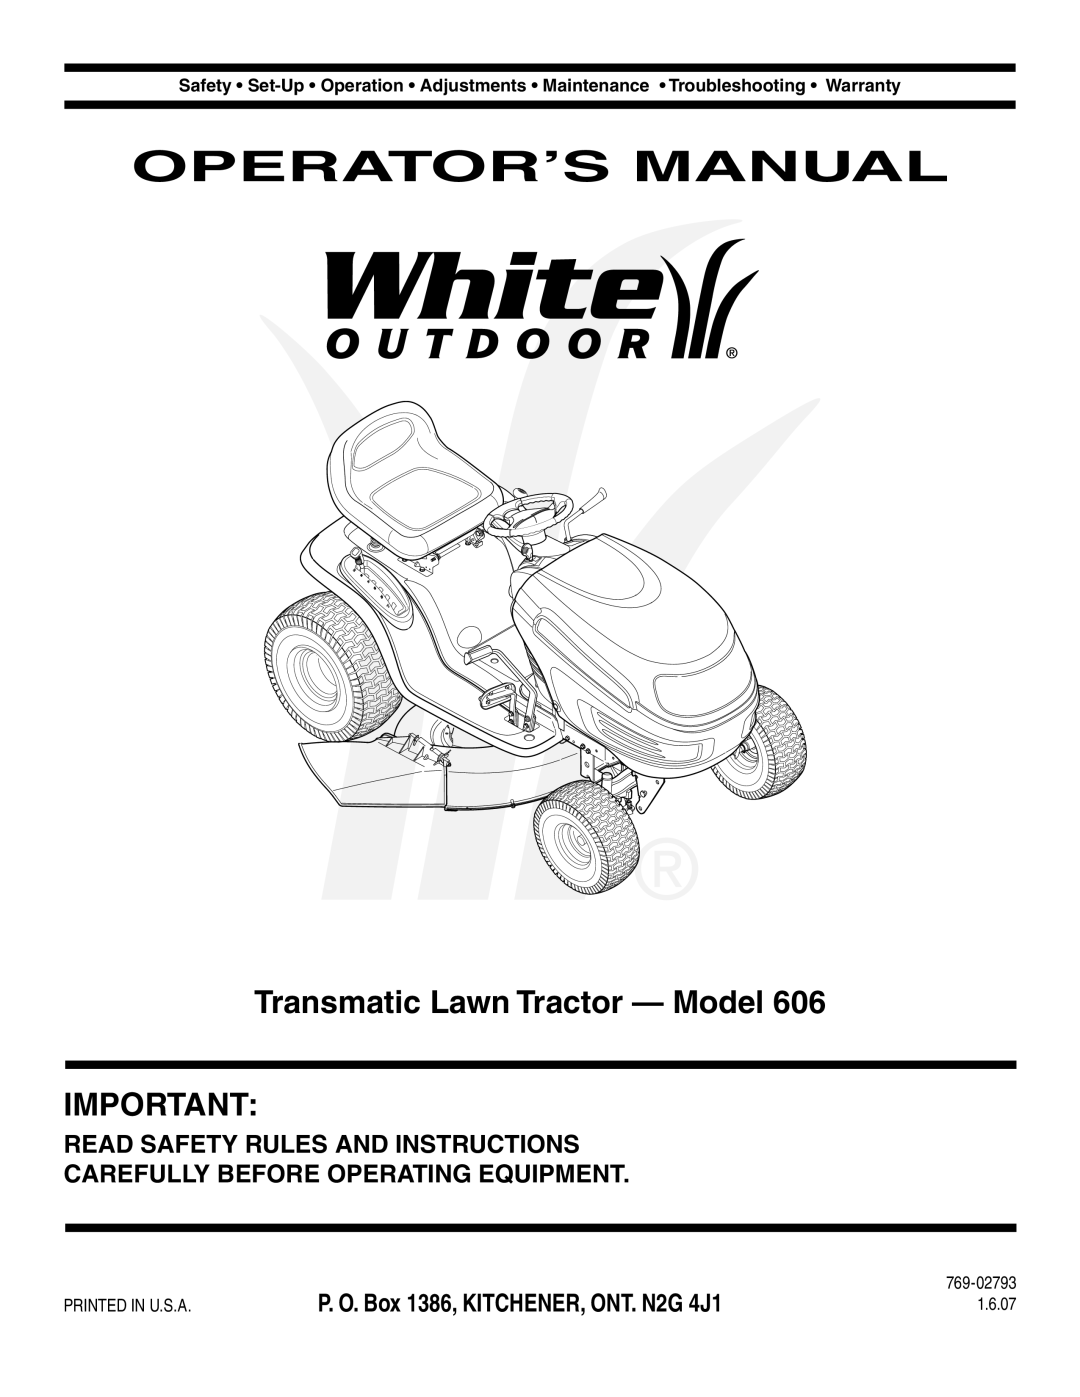 White Outdoor 606 manual Operator’S Manual, Transmatic Lawn Tractor - Model, Read Safety Rules And Instructions 